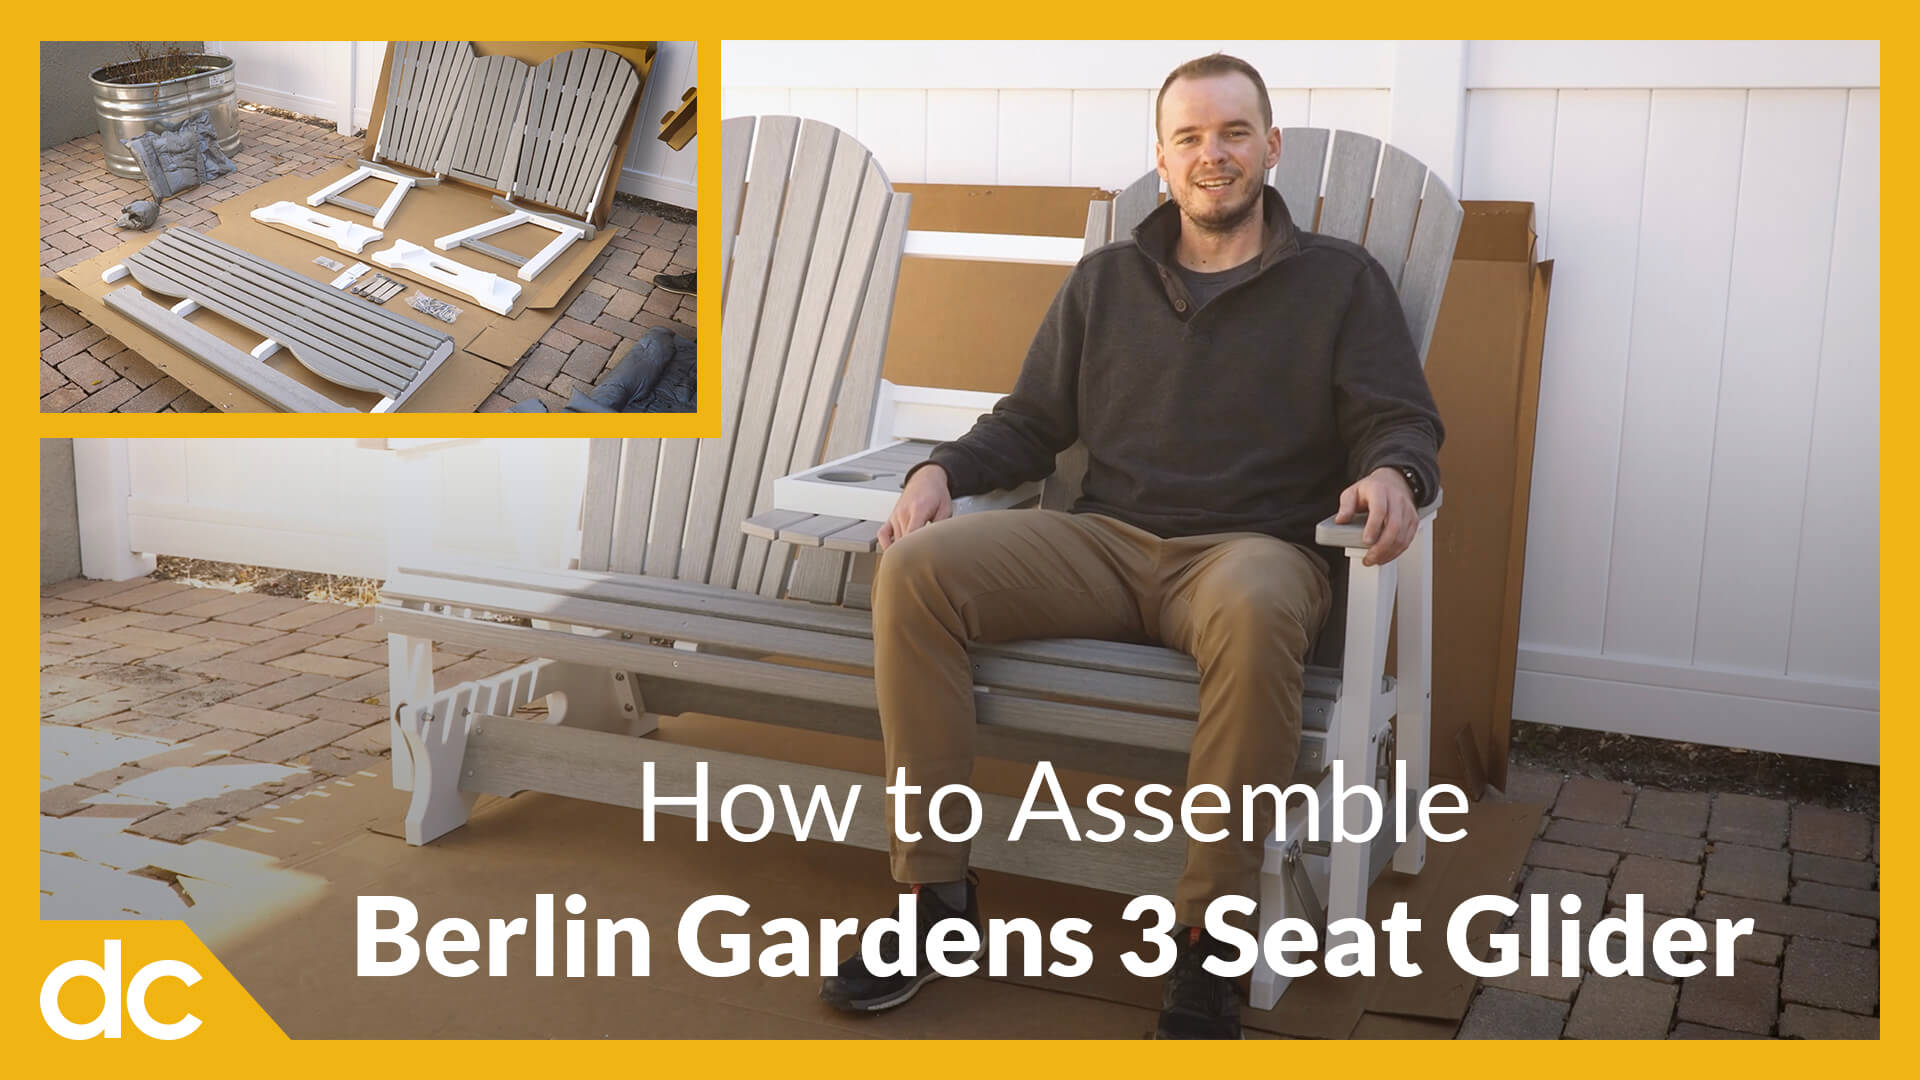 How to Asemble Berlin Gardens 3 Seat Glider